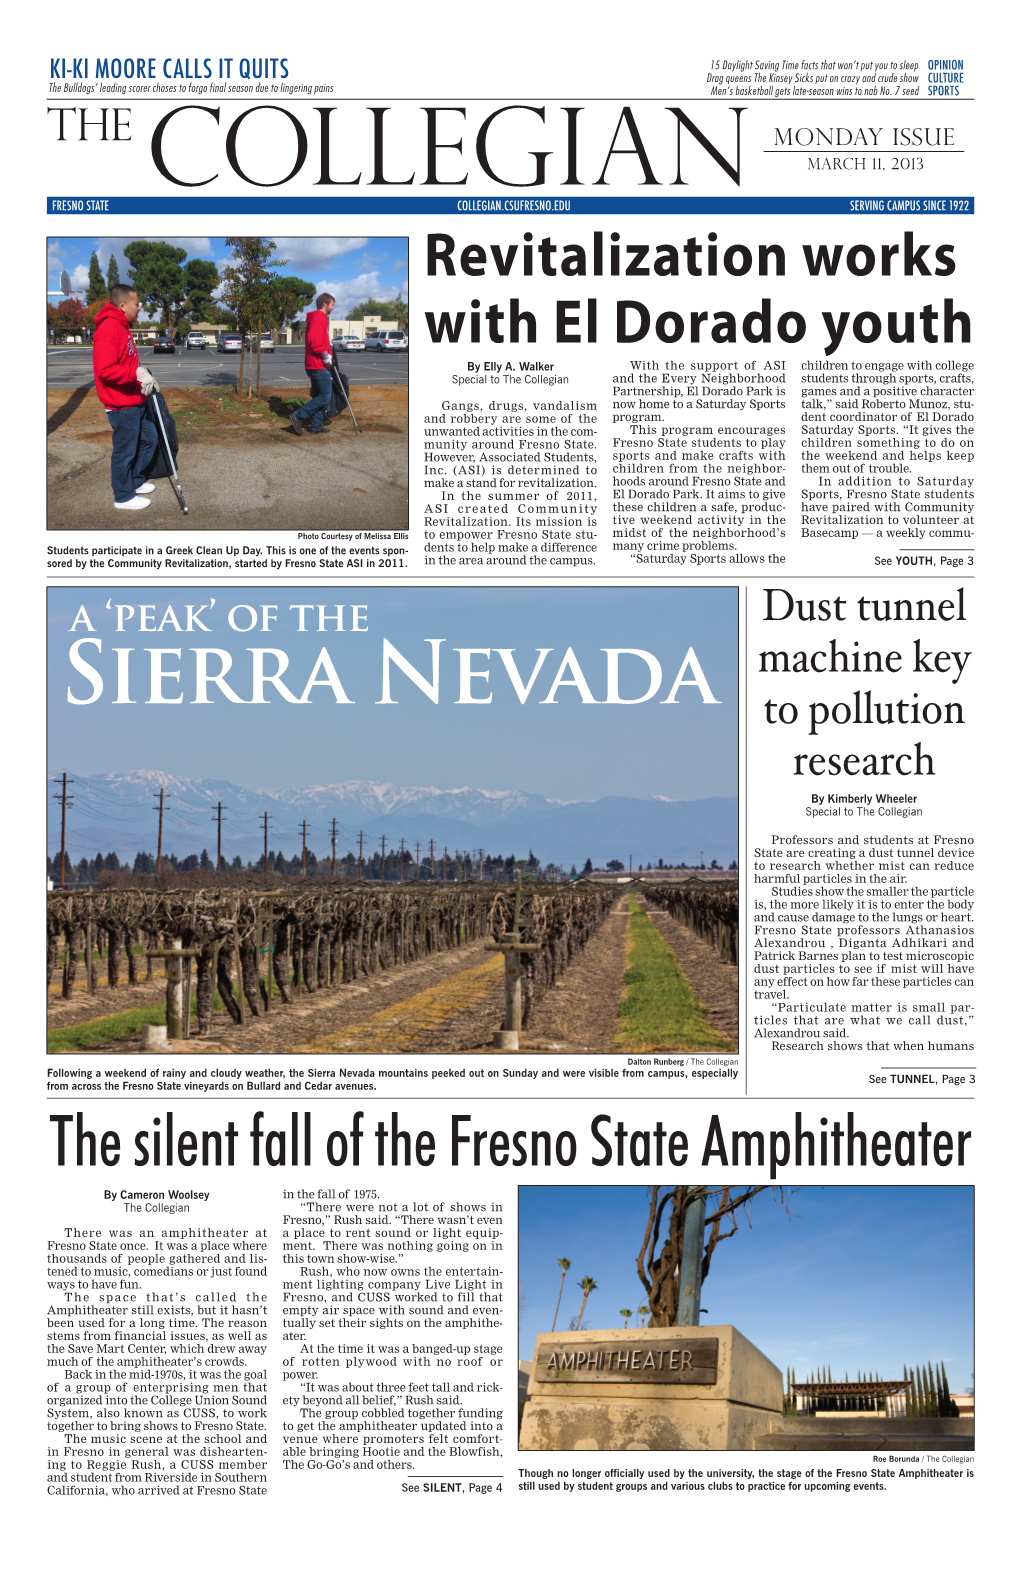 Sierra Nevada to Pollution Research by Kimberly Wheeler Special to the Collegian